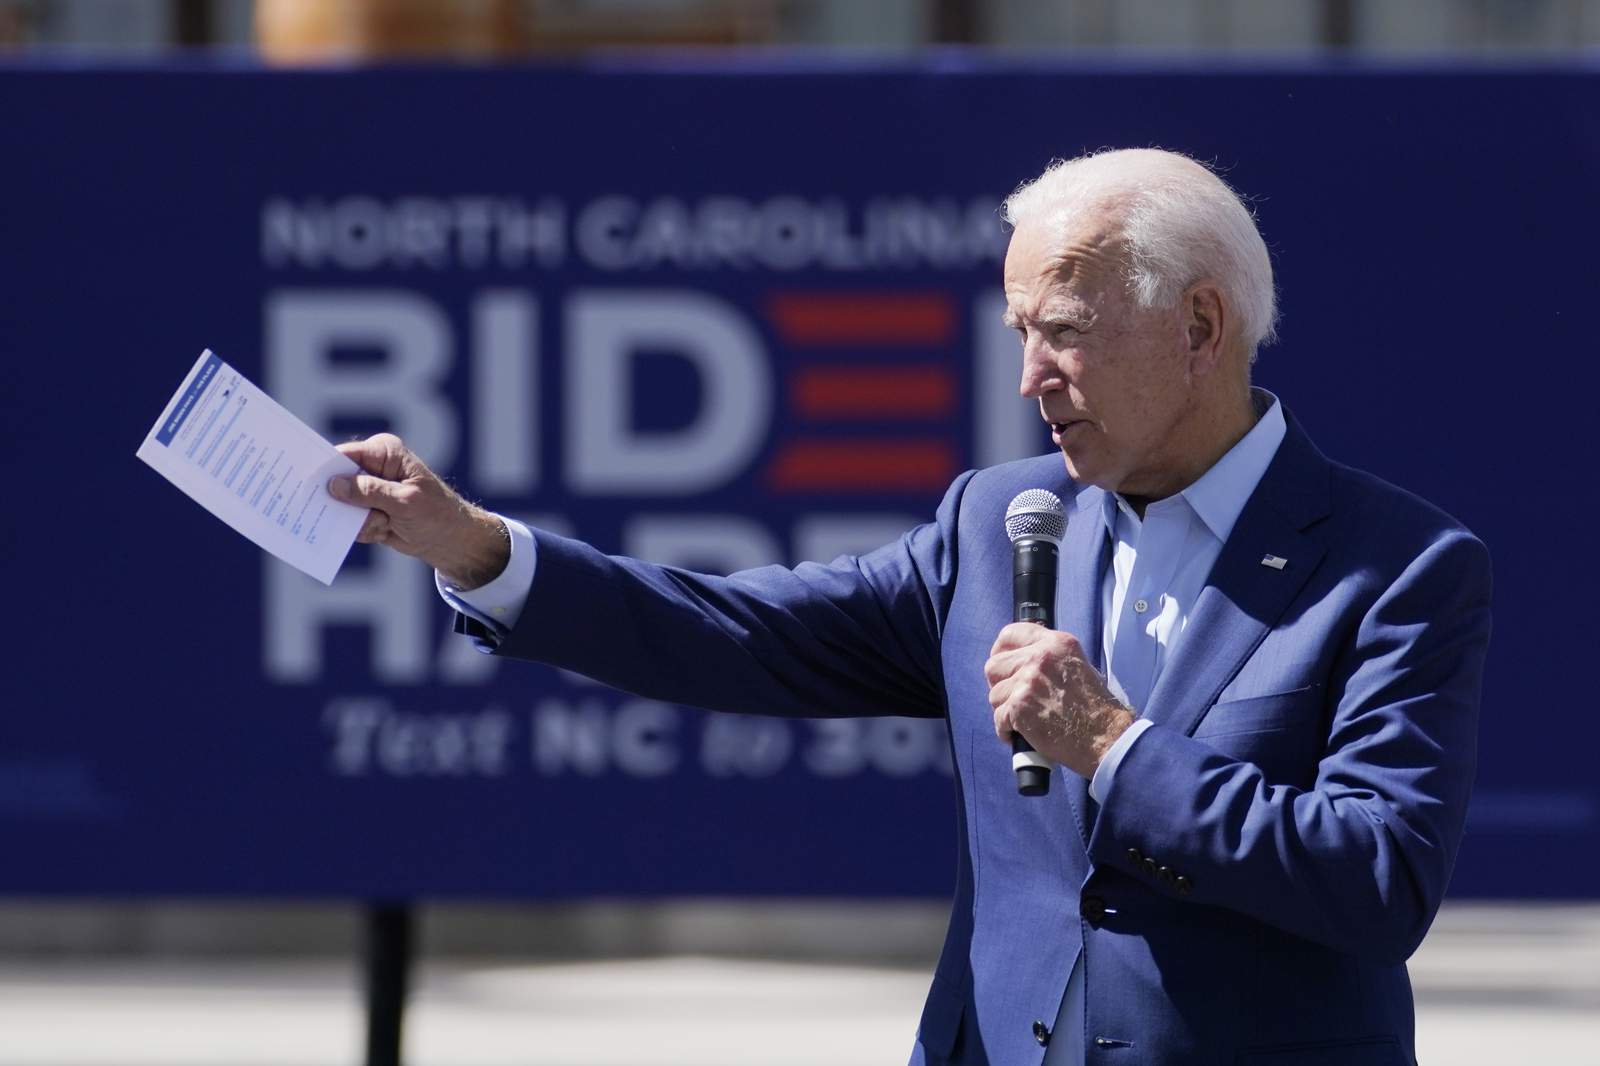 Biden's low-key campaign style worries some Democrats